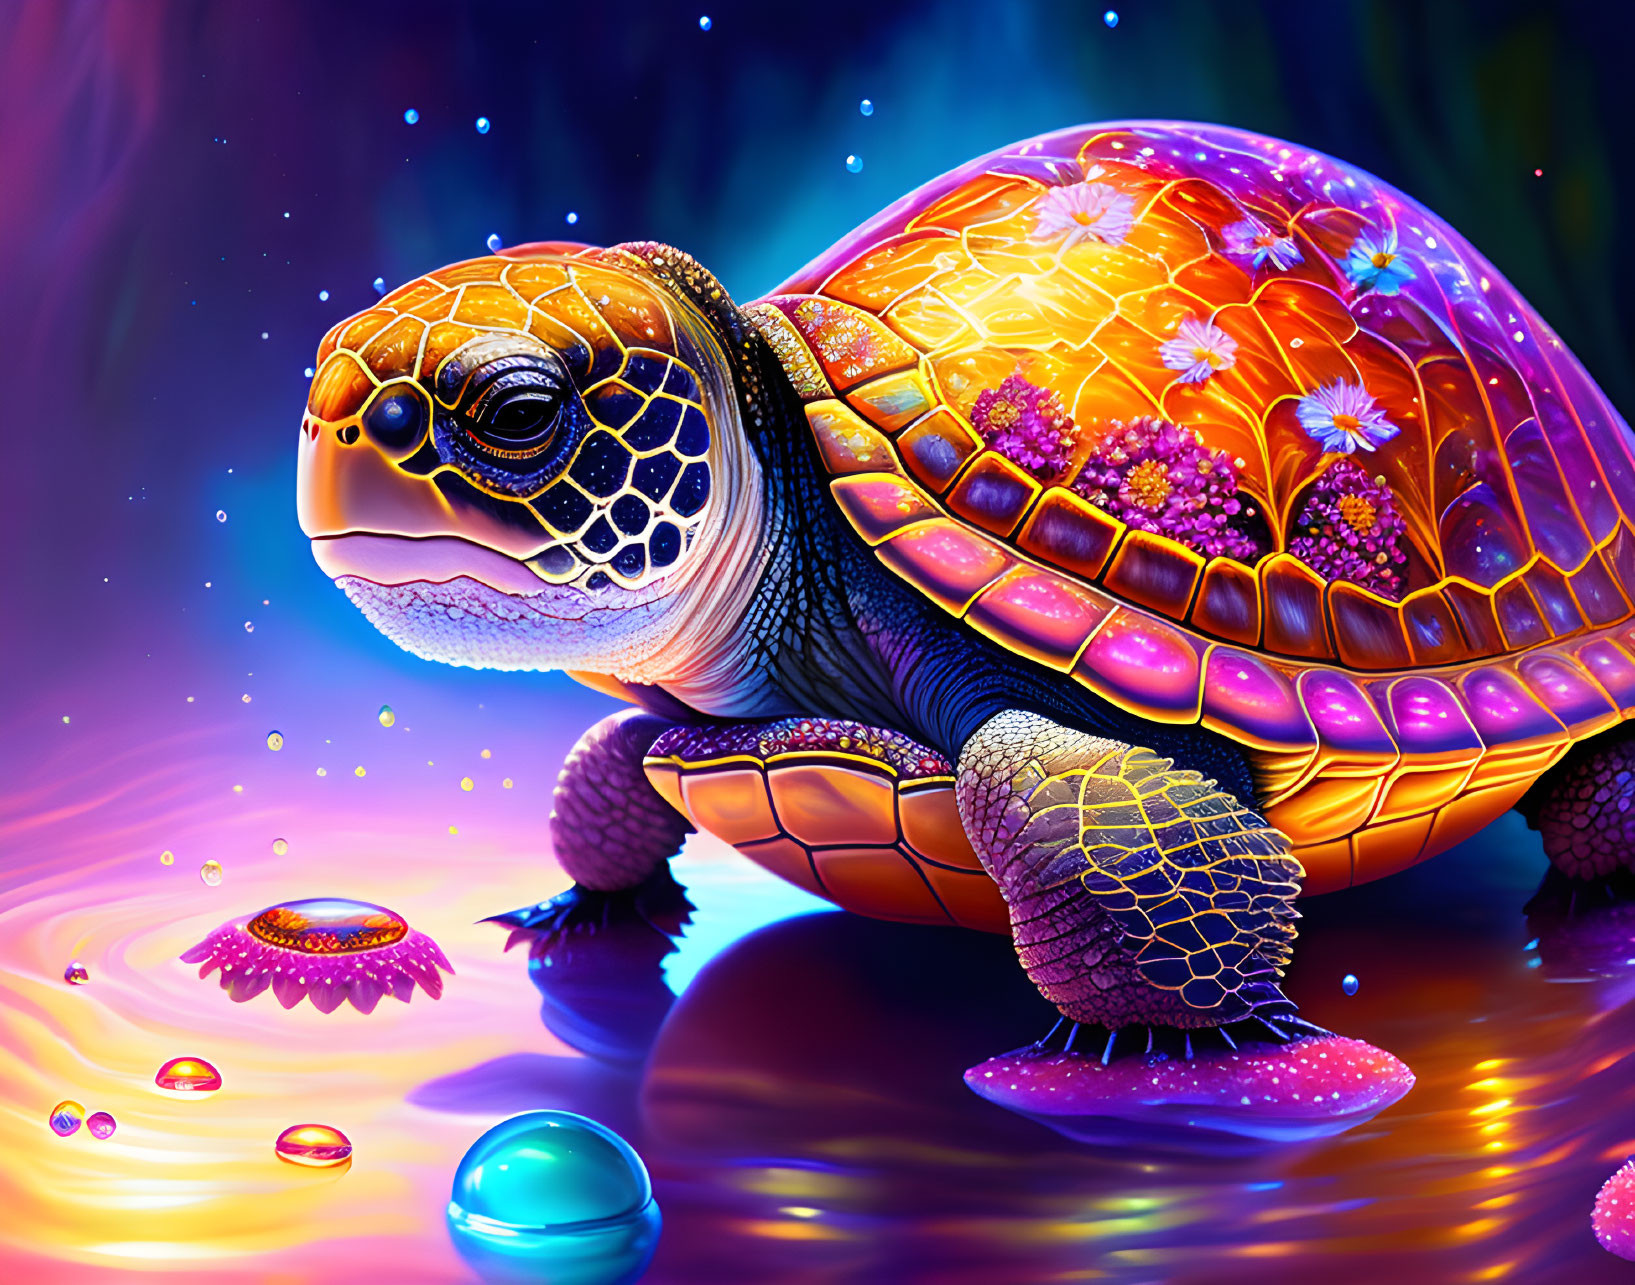 Colorful digital artwork: Turtle with floral shell on reflective surface